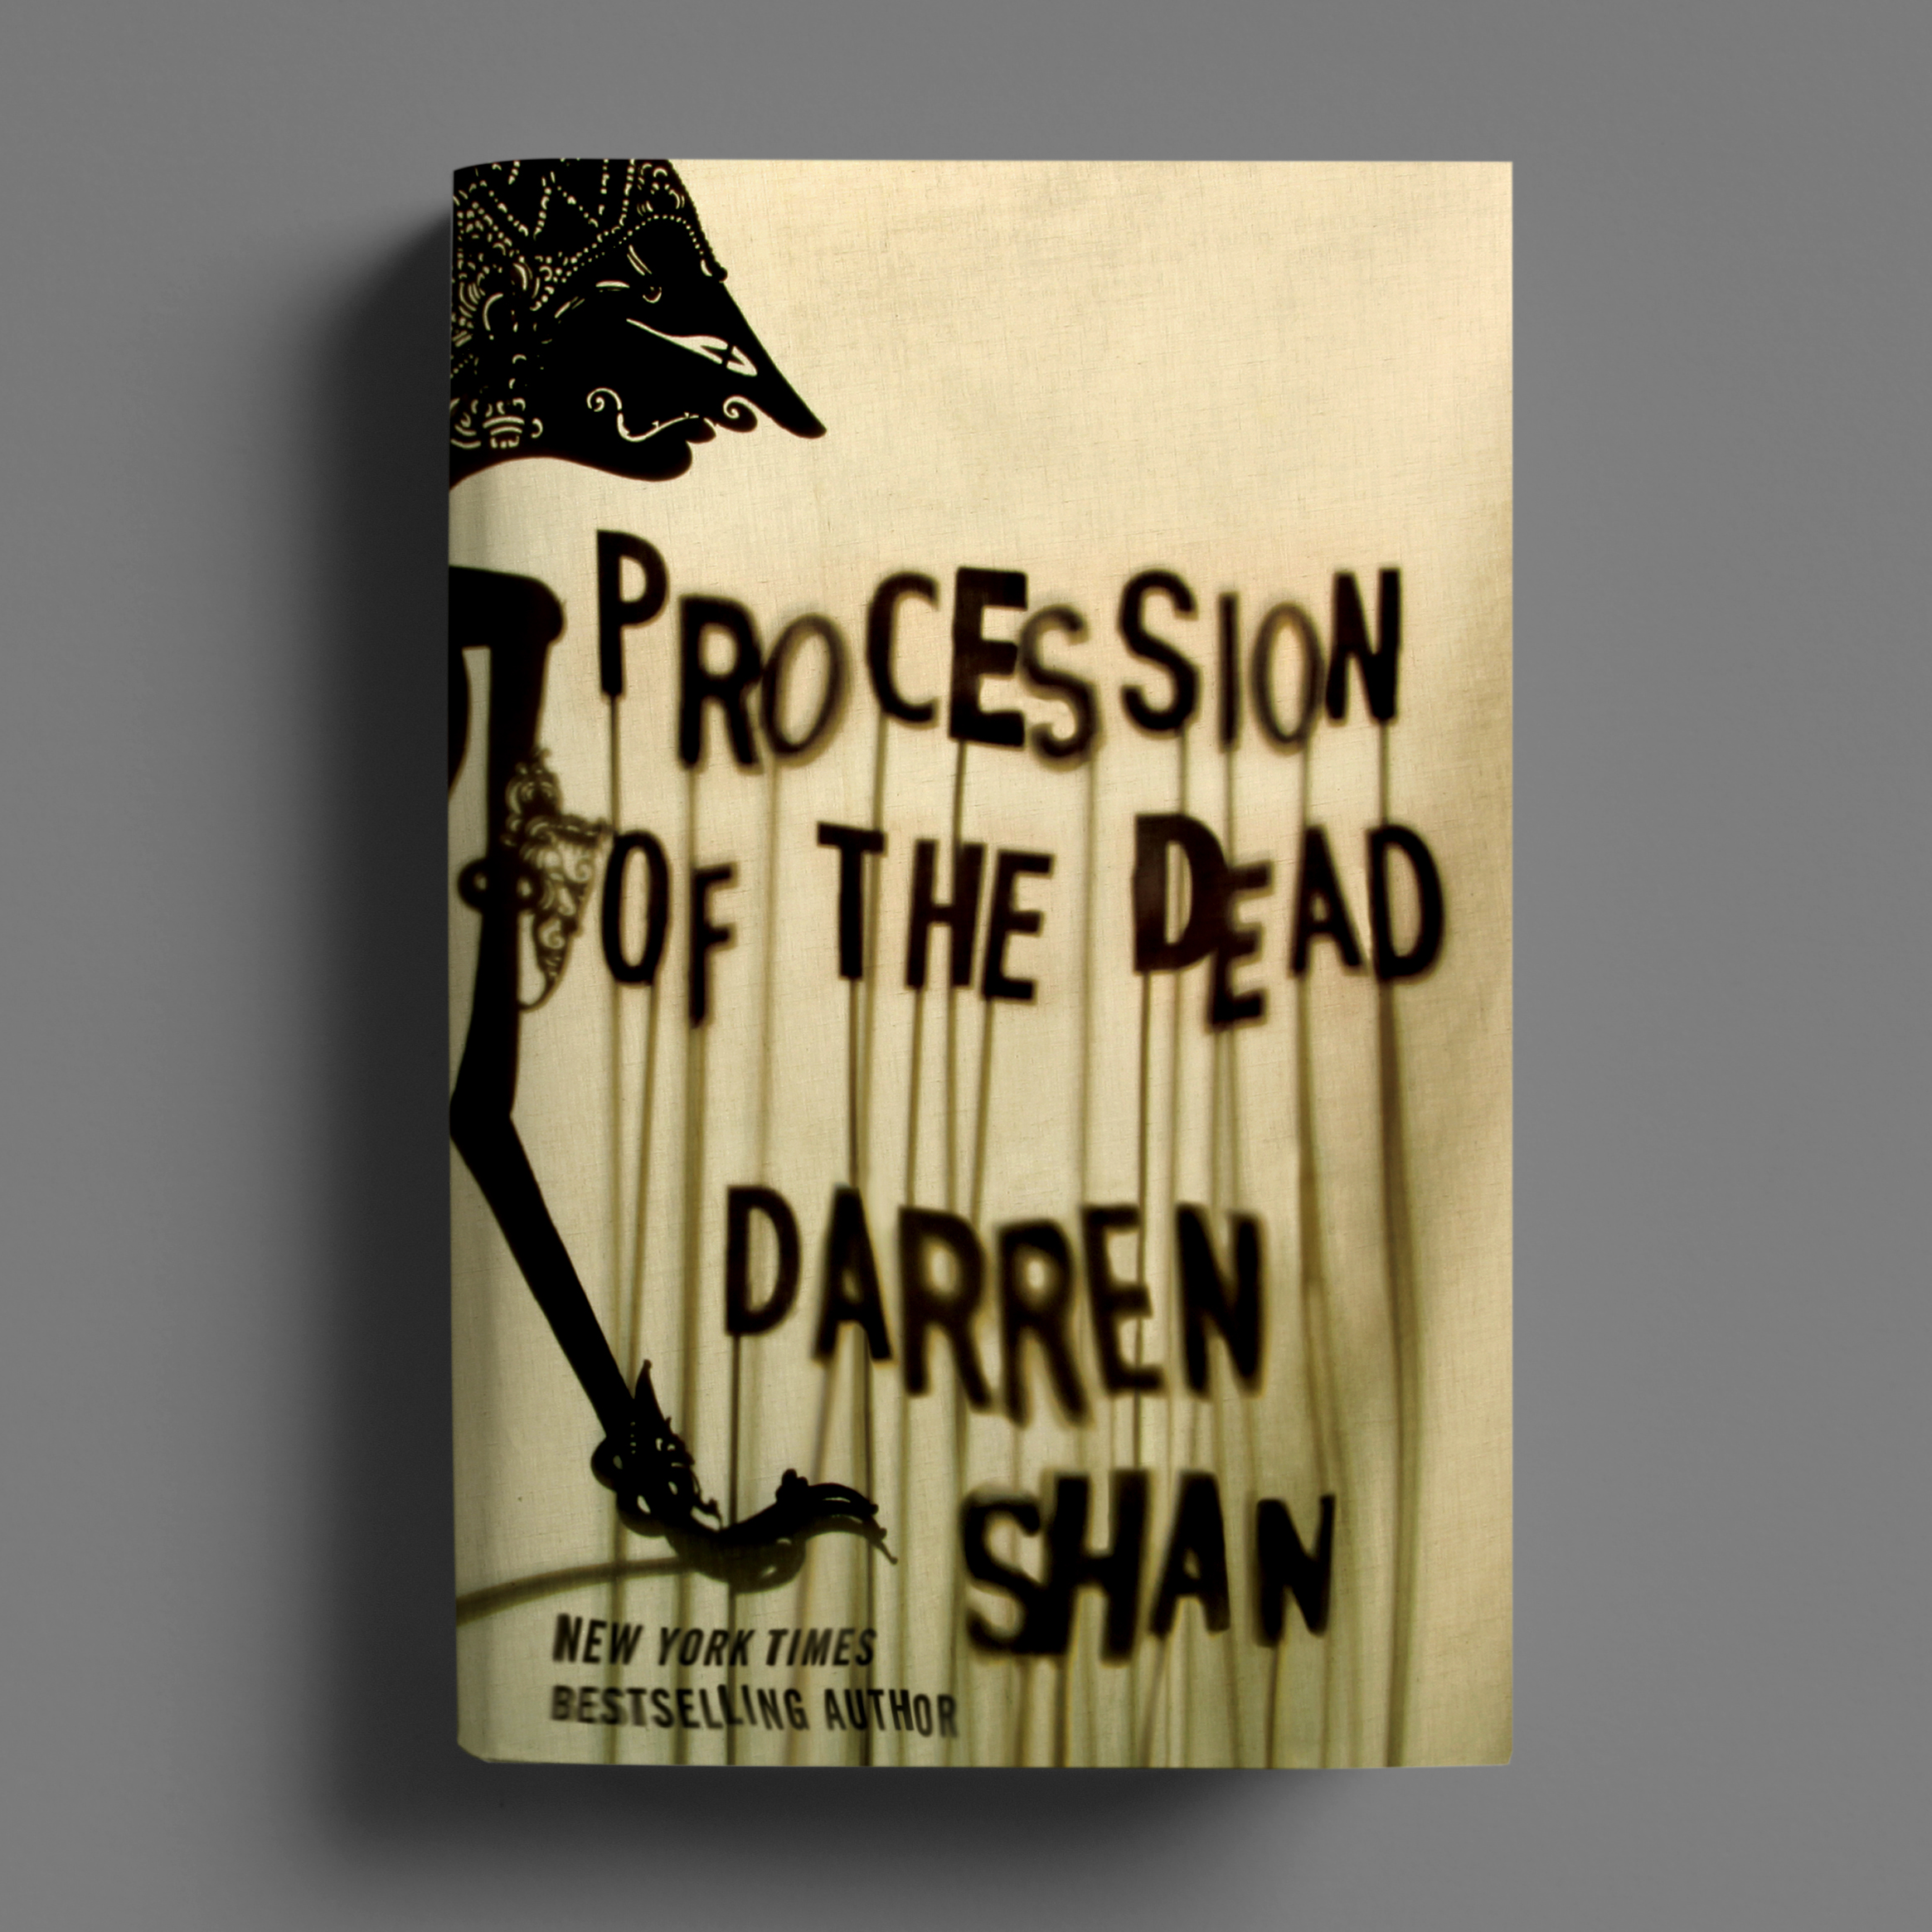 Faceout Books interview: Procession of the Dead